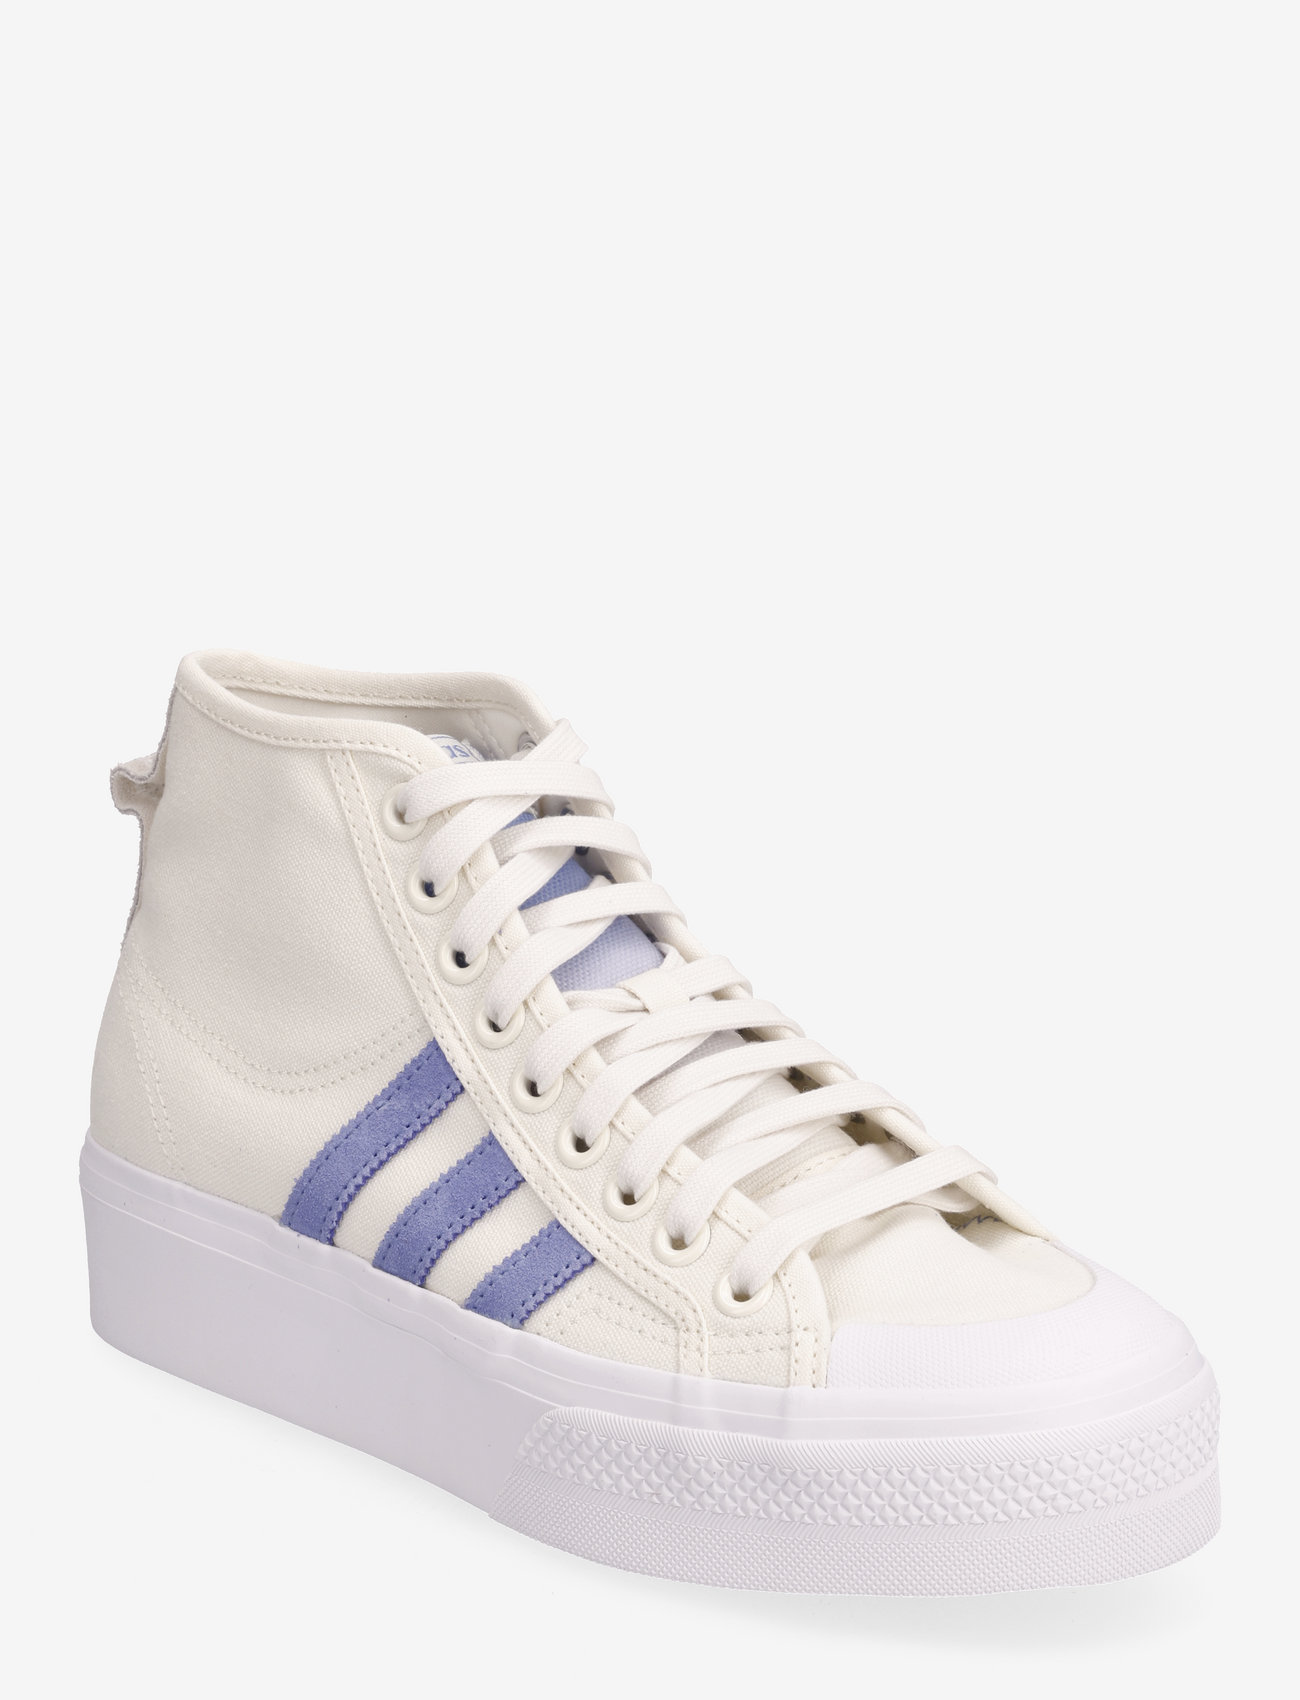 adidas Originals - Nizza Platform Mid Shoes - chunky sneakers - owhite/blufus/ftwwht - 0